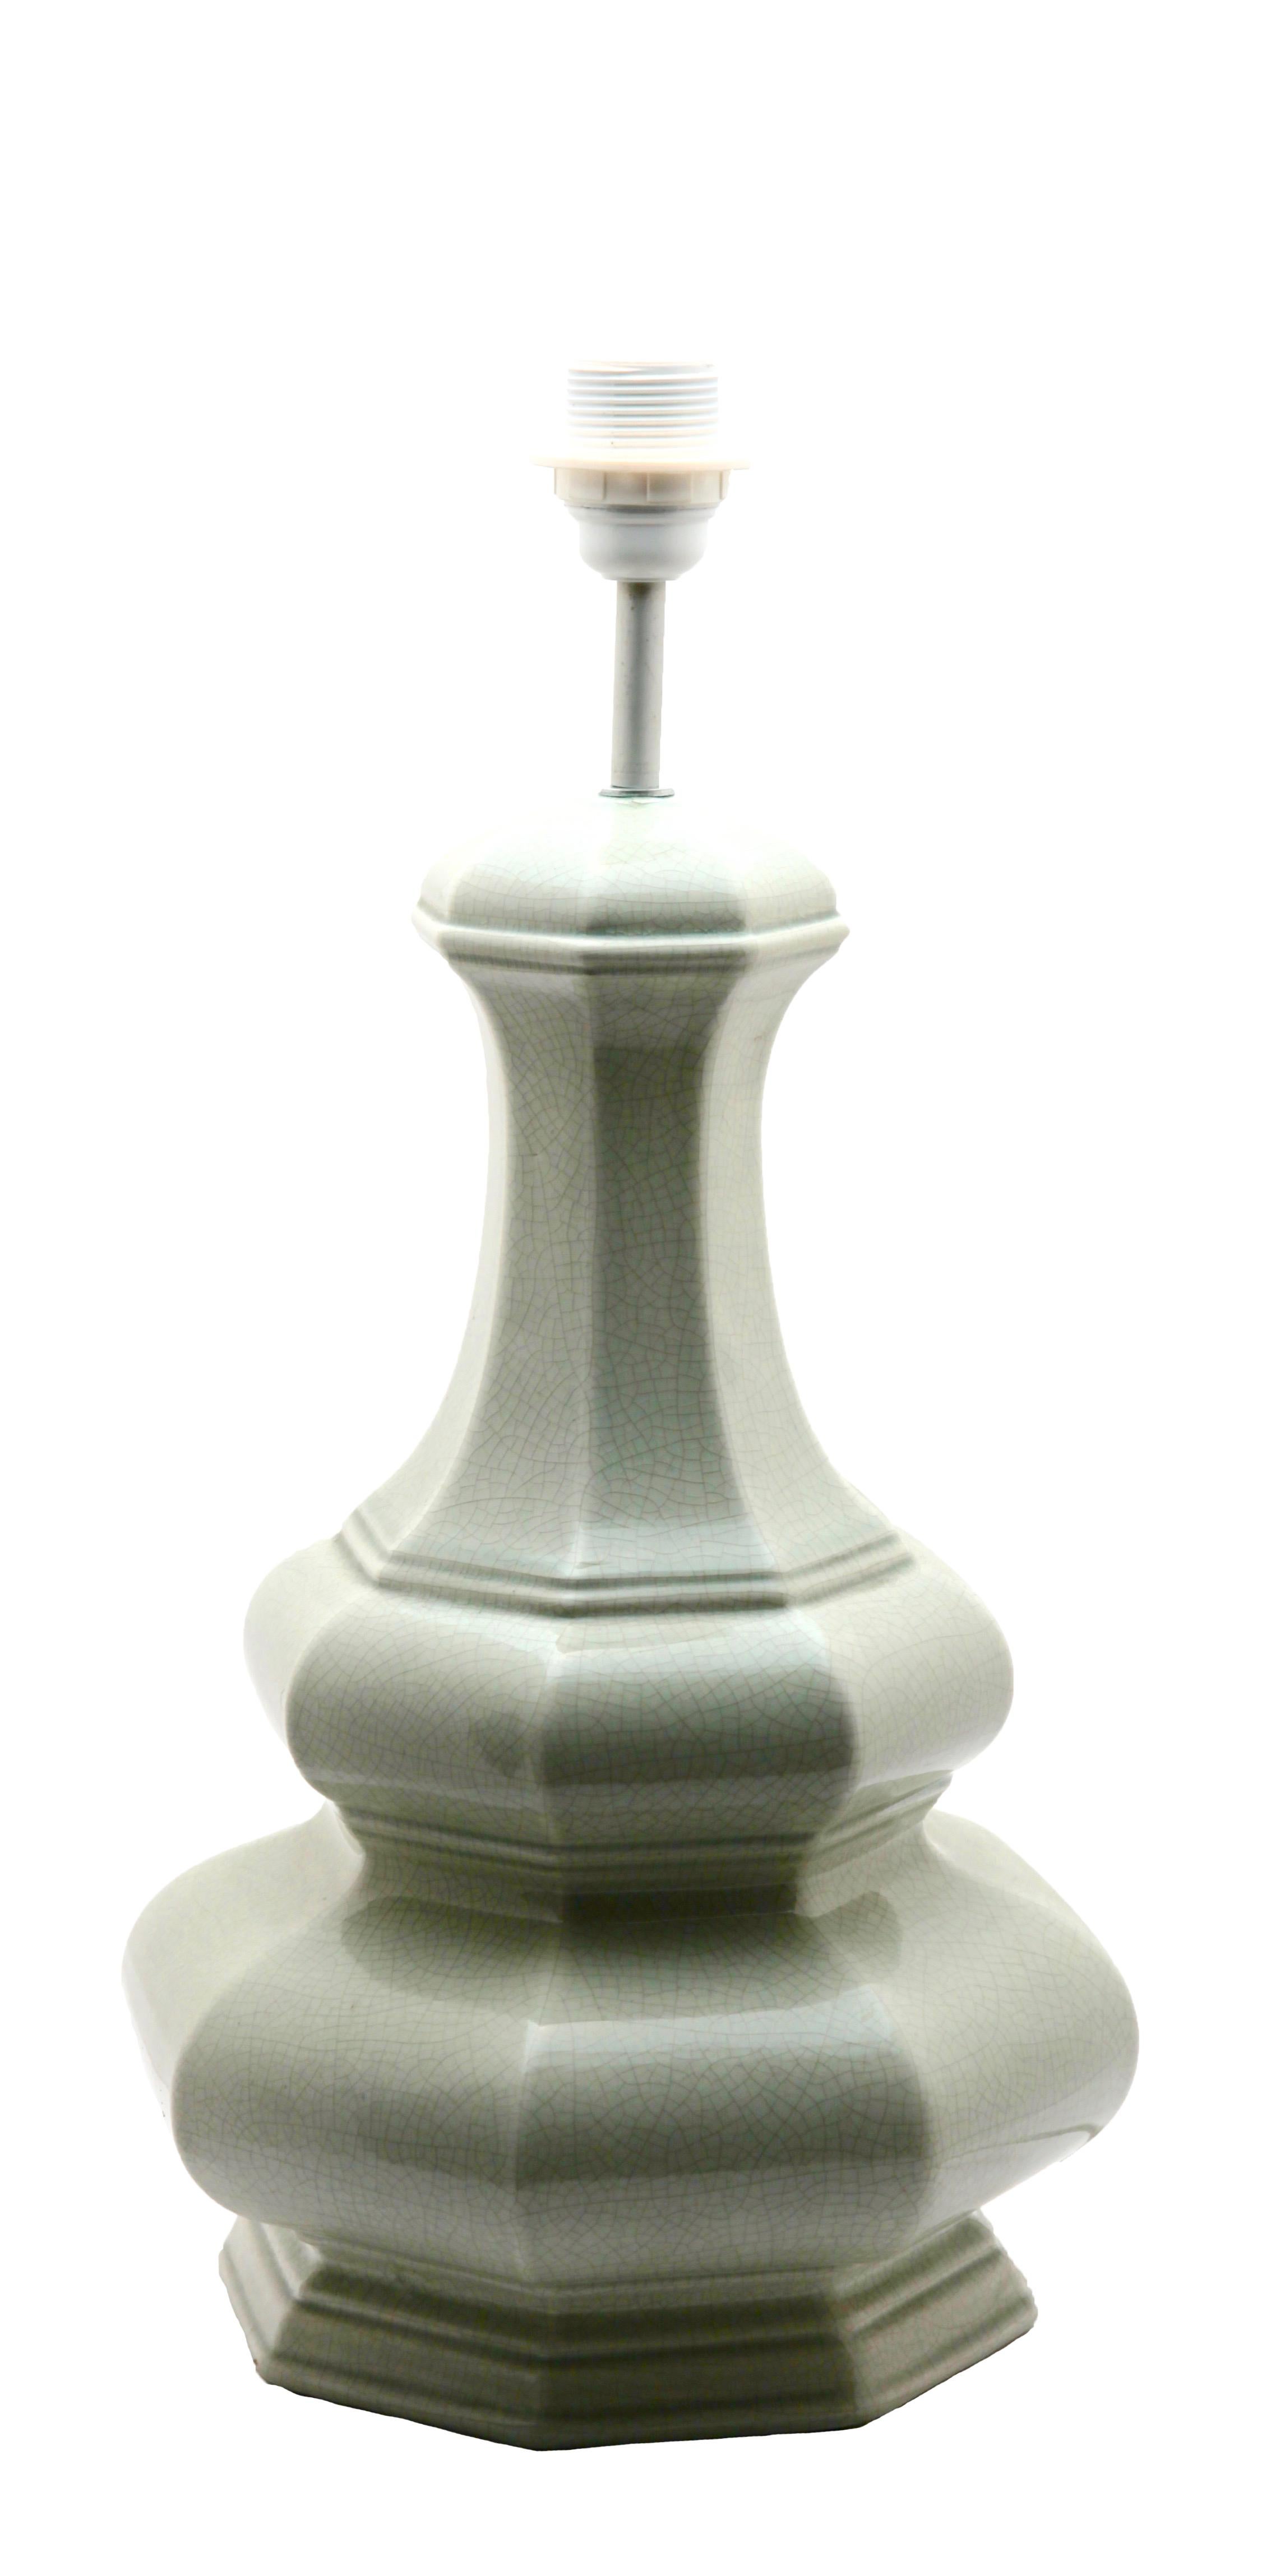 Hand-Crafted Celadon Table Lamp, Palest Jade with Fine Craquelure Glaze